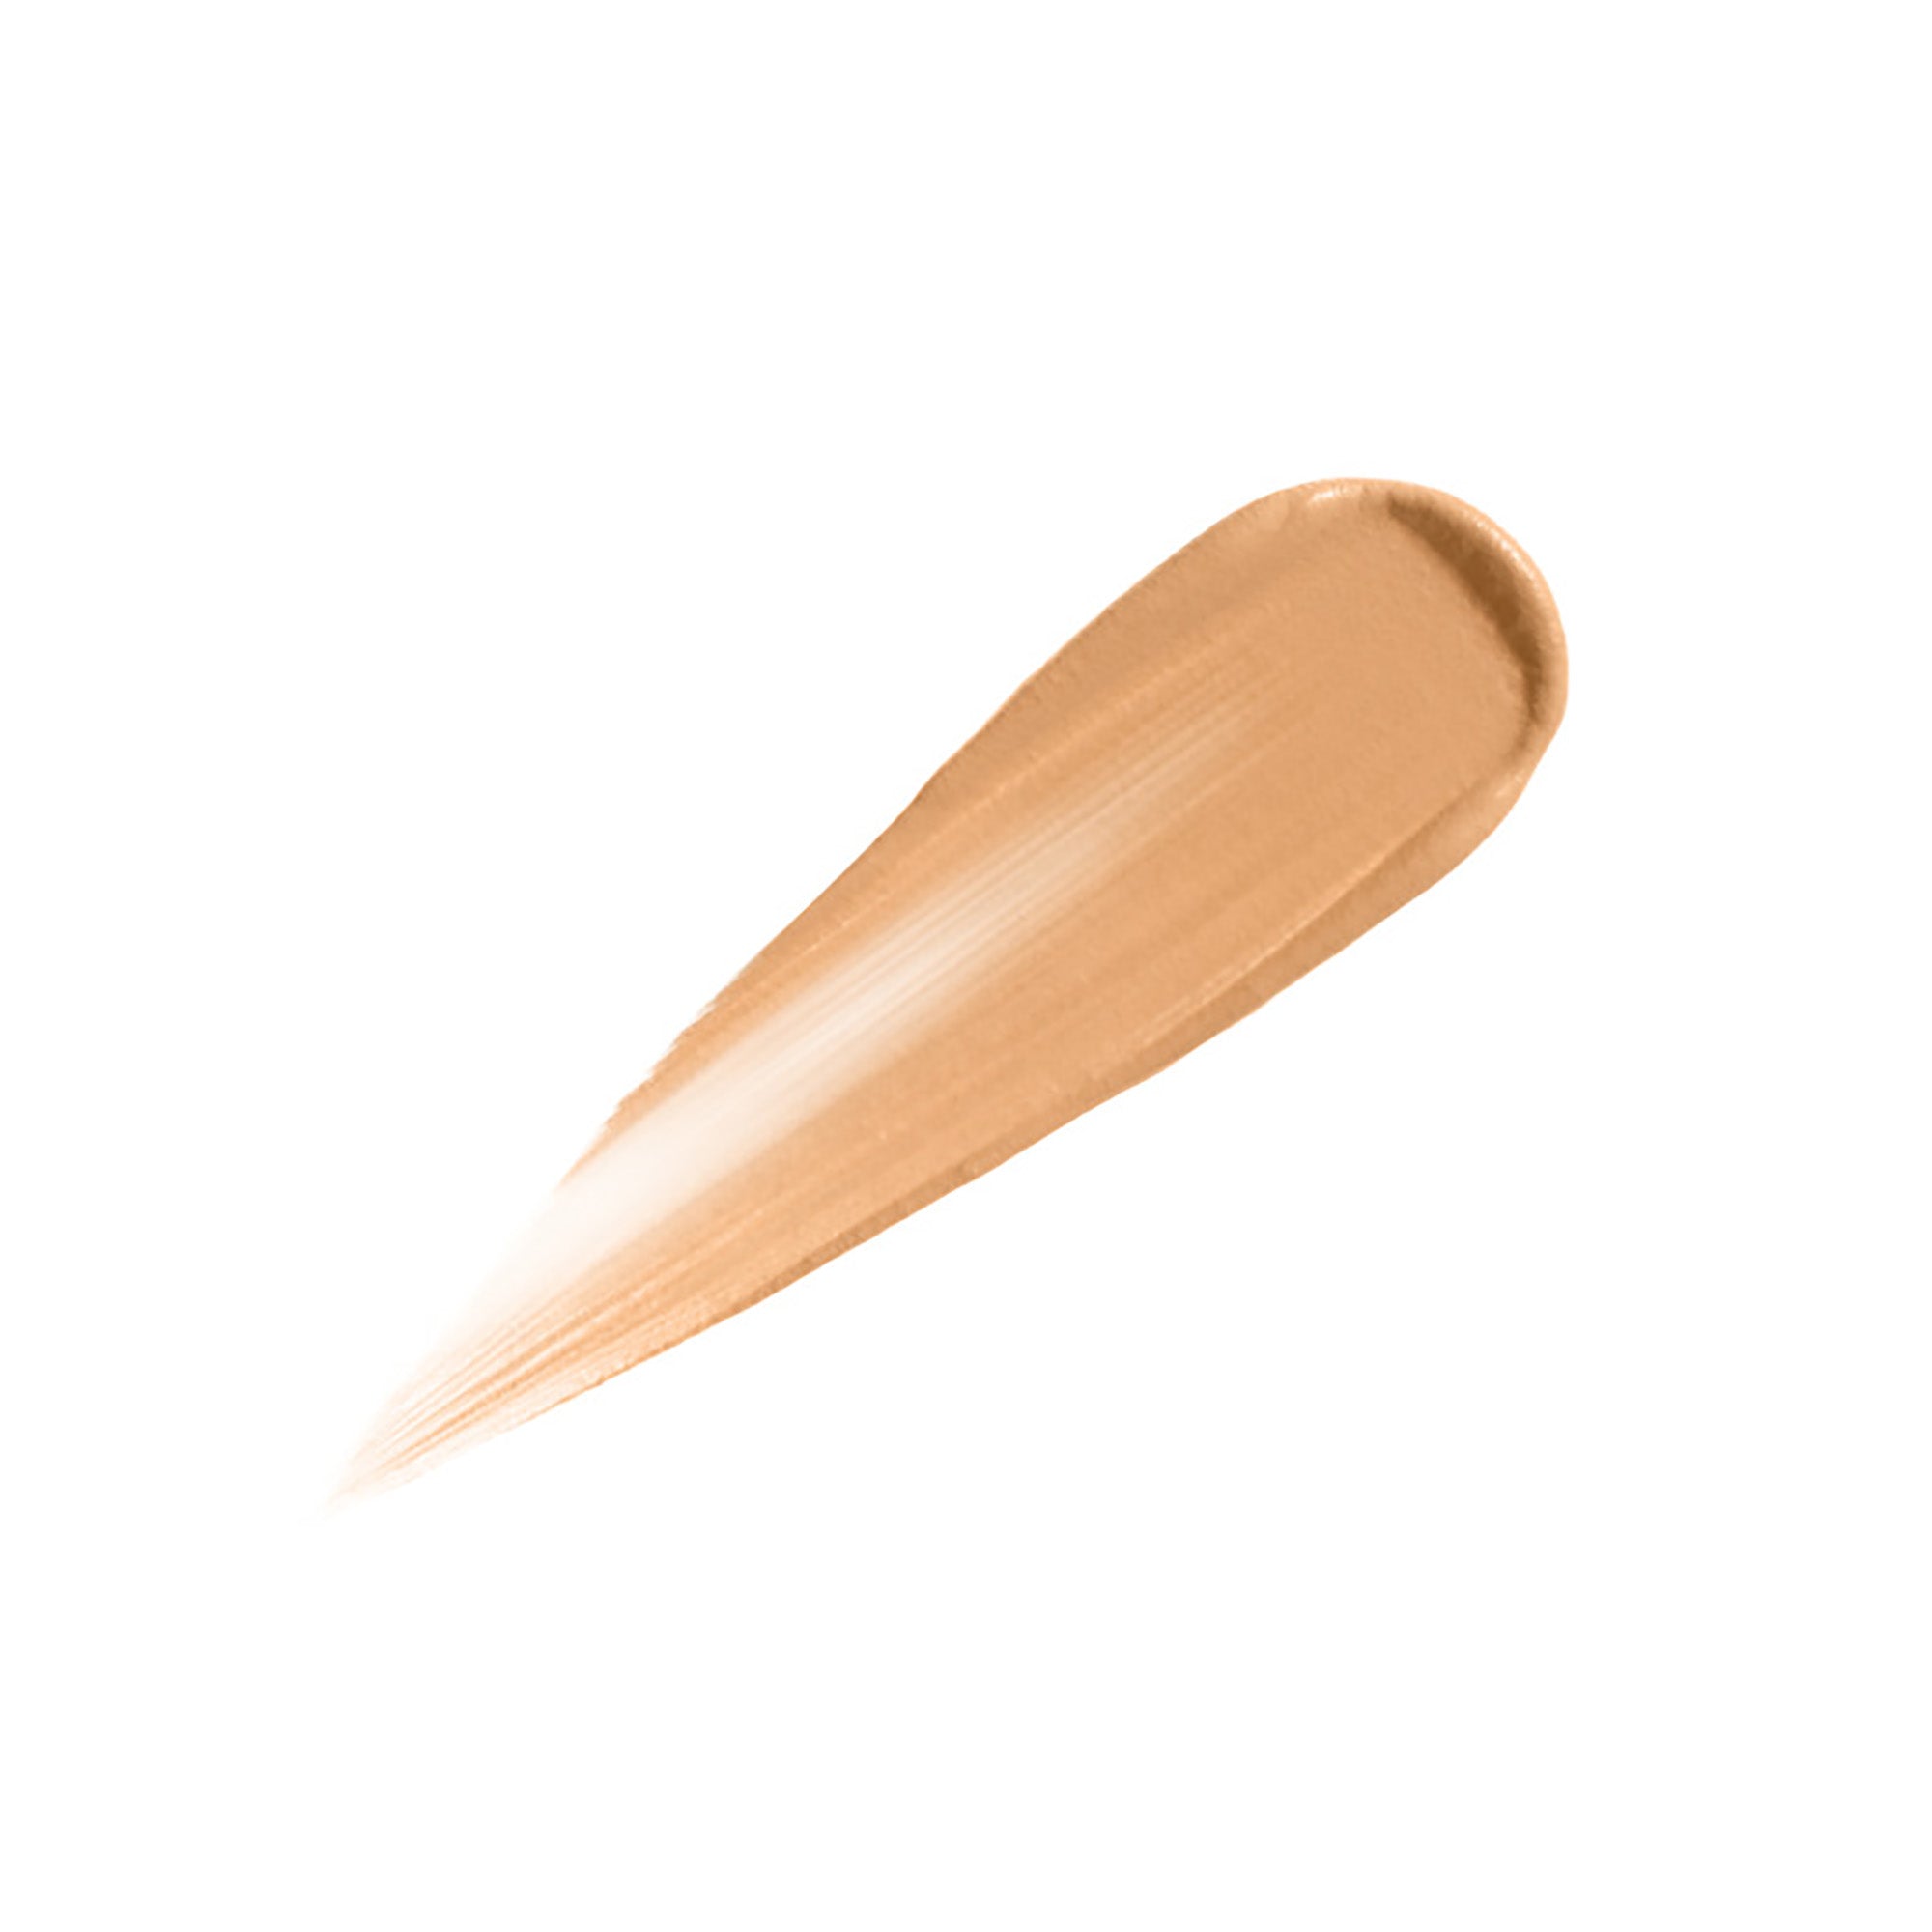 Bare Minerals Complexion Rescue Brightening Concealer SPF 25 / LIGHT BAMBOO